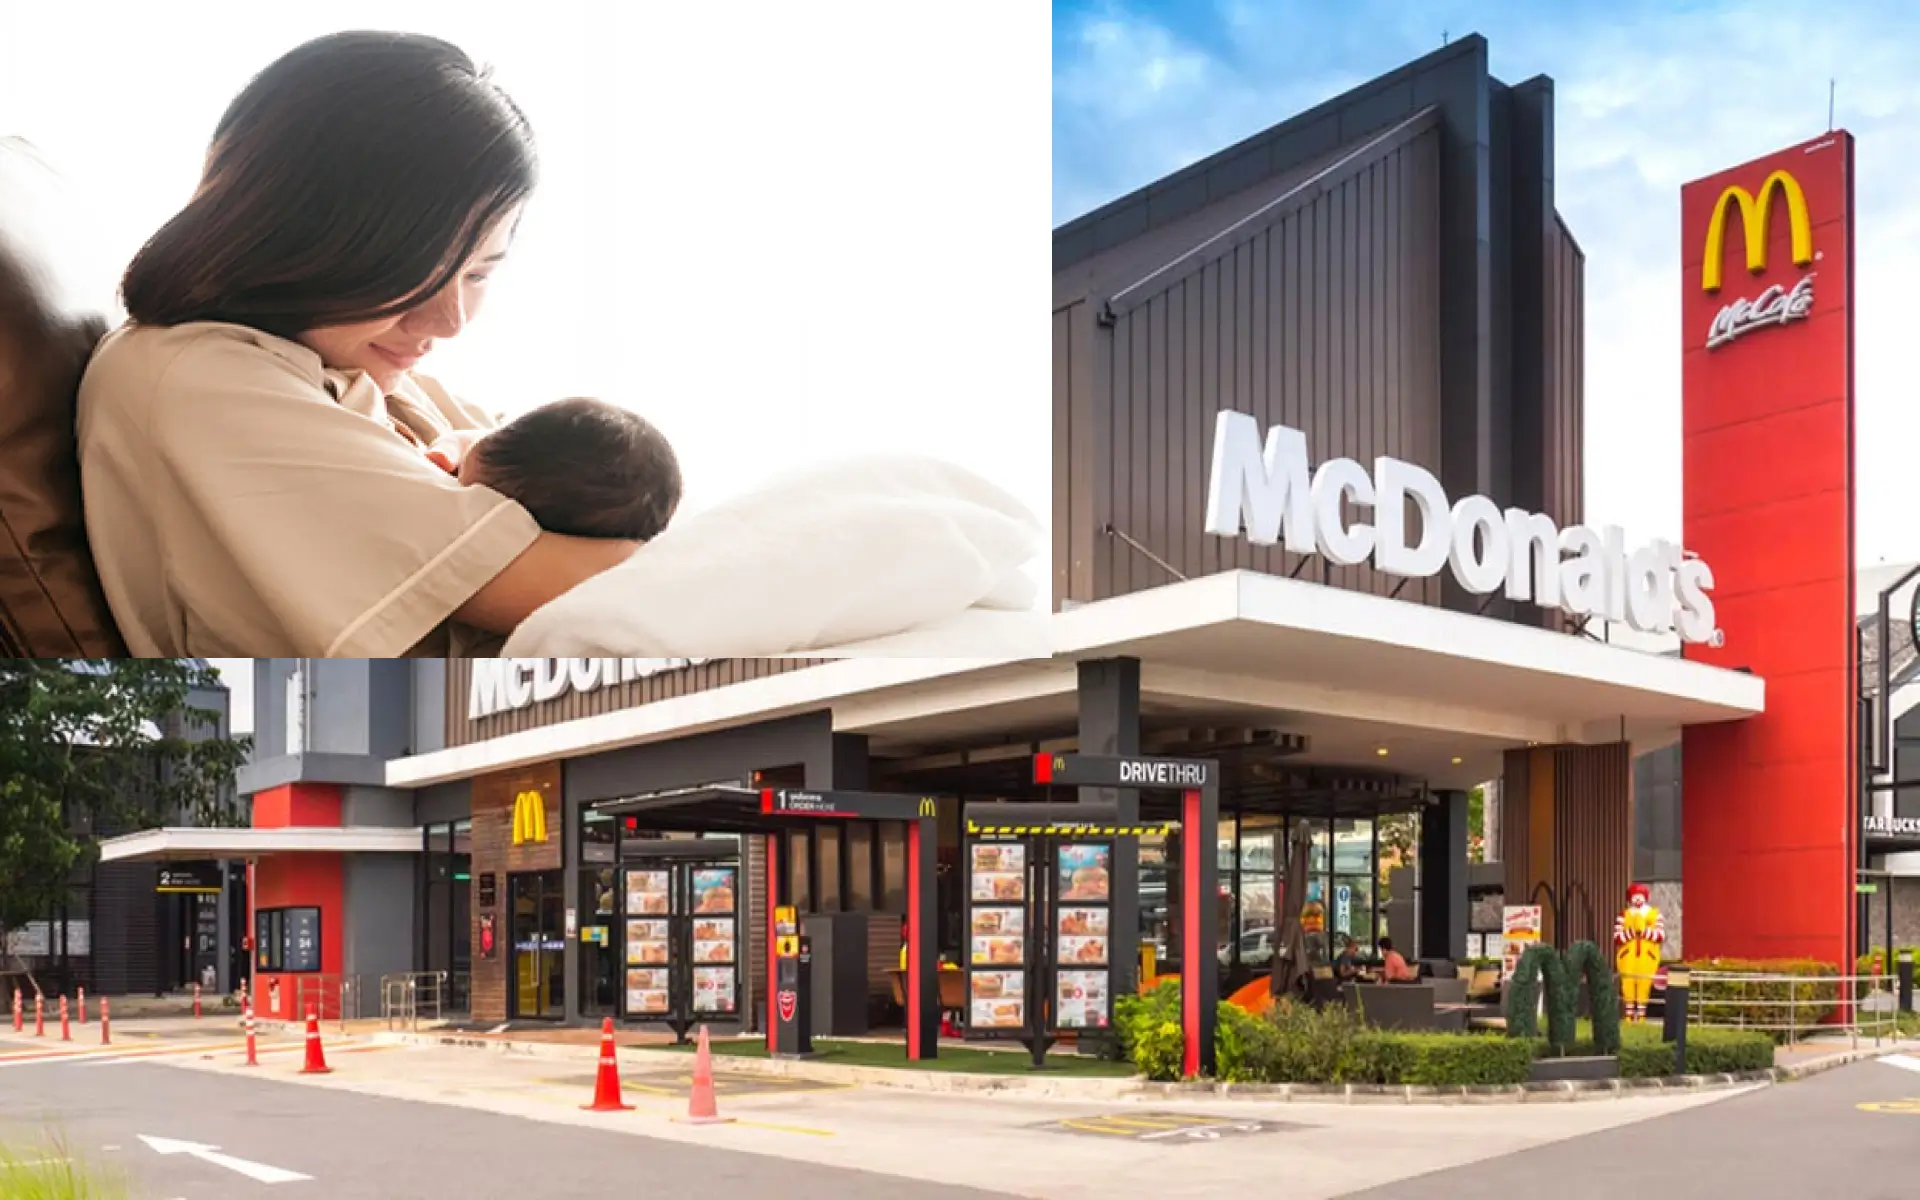 Breastfeeding Rights at McDonald’s: A Class Action Lawsuit Exposes Workplace Challenges